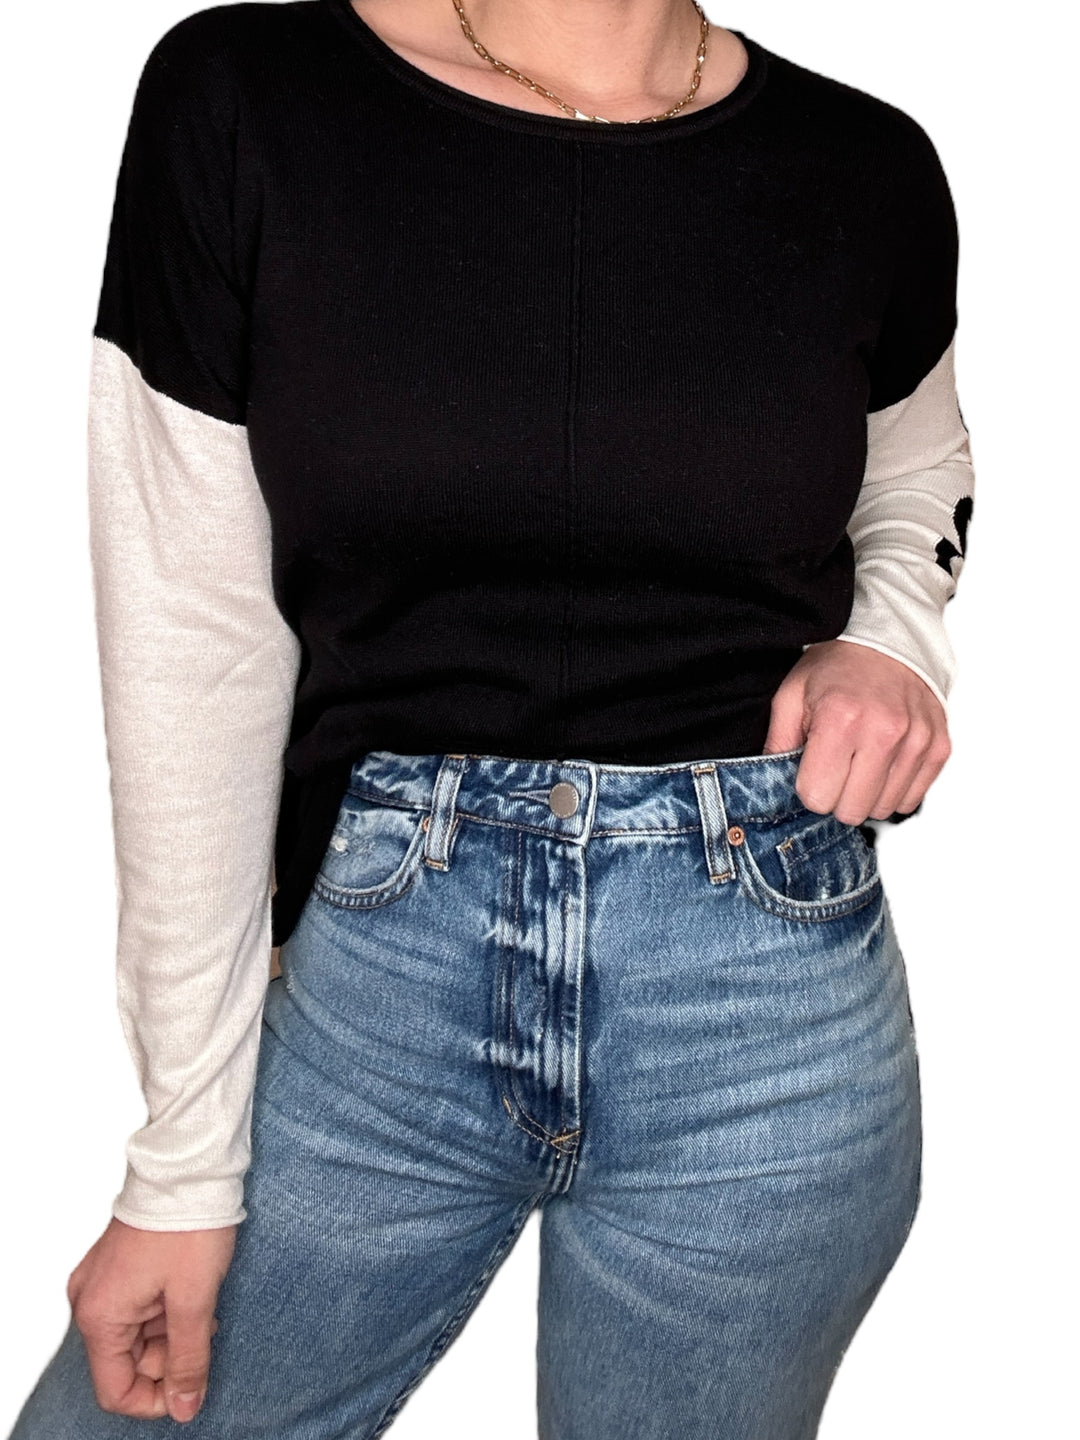 LOVE SLEEVE BLACK SWEATER - Kingfisher Road - Online Boutique